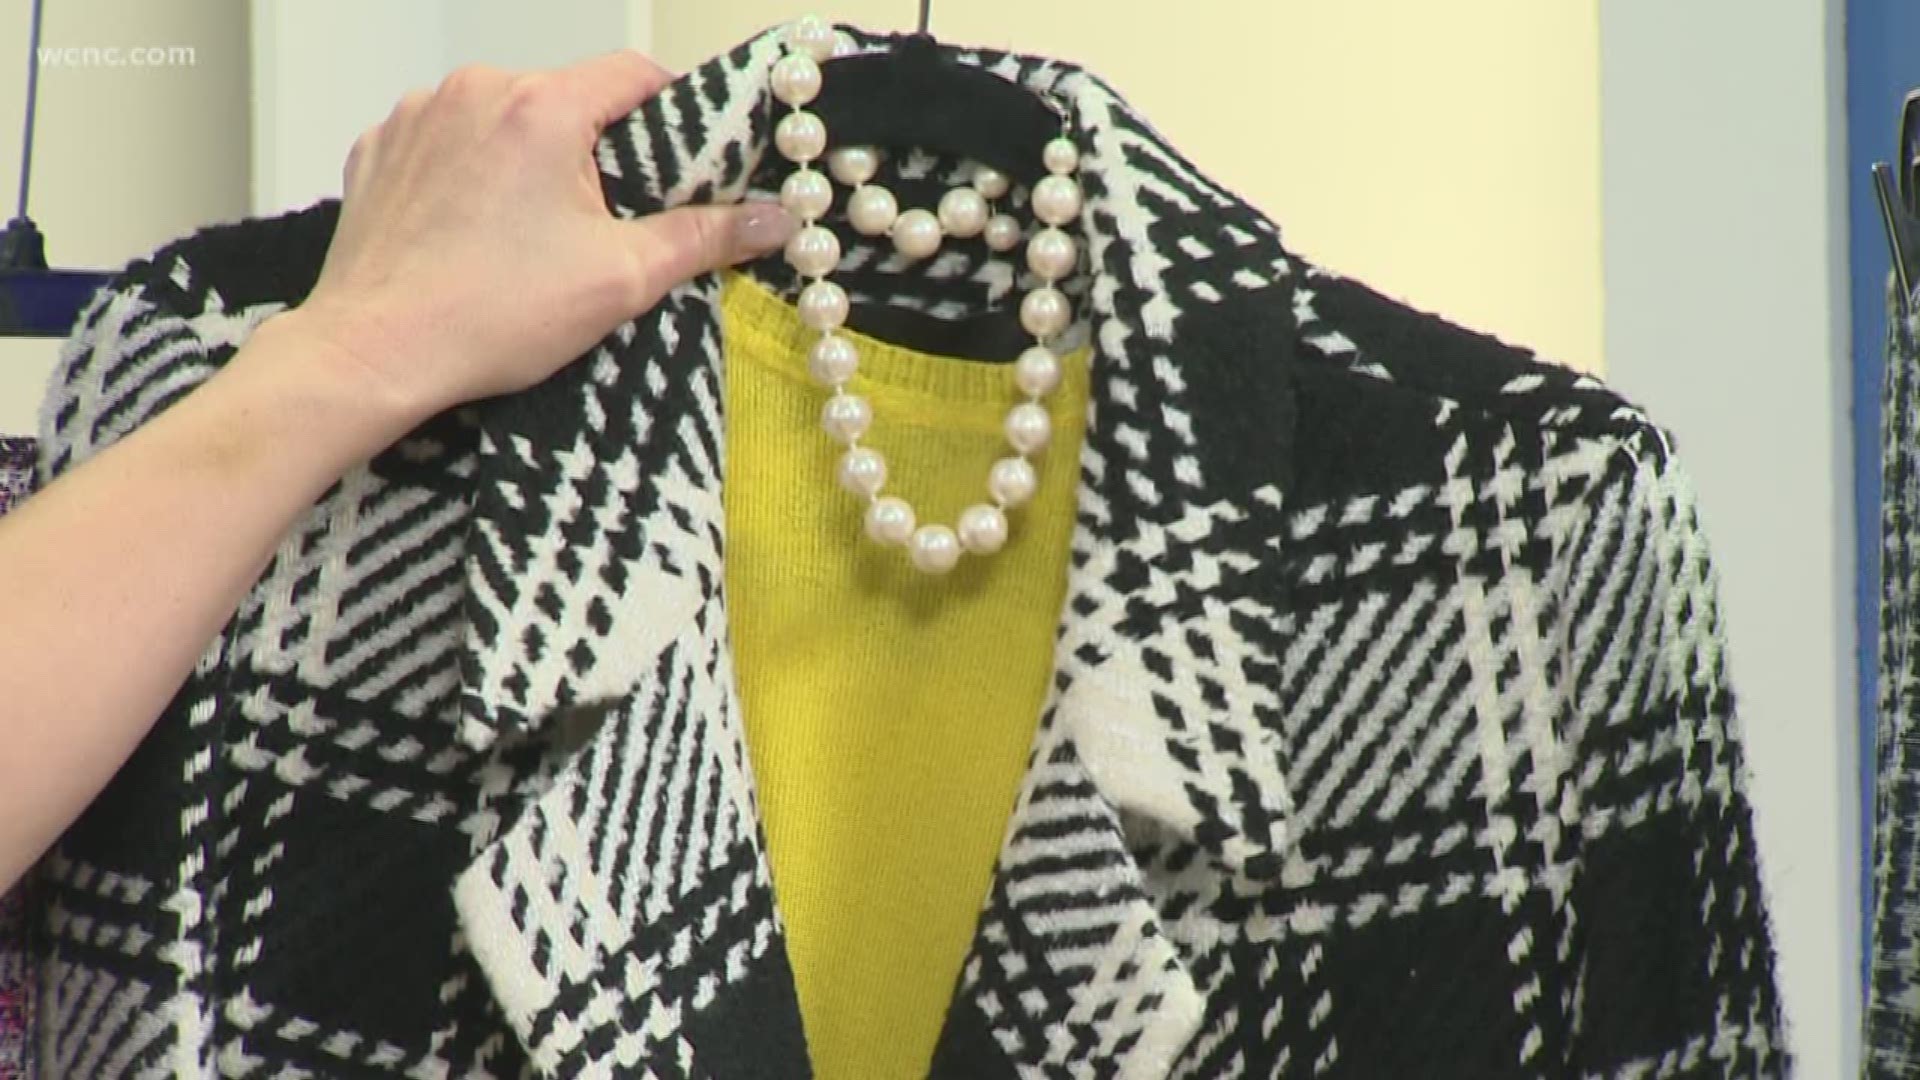 Stylist Felicia Bittle shows us how to properly mix patterns and prints for a bold look.